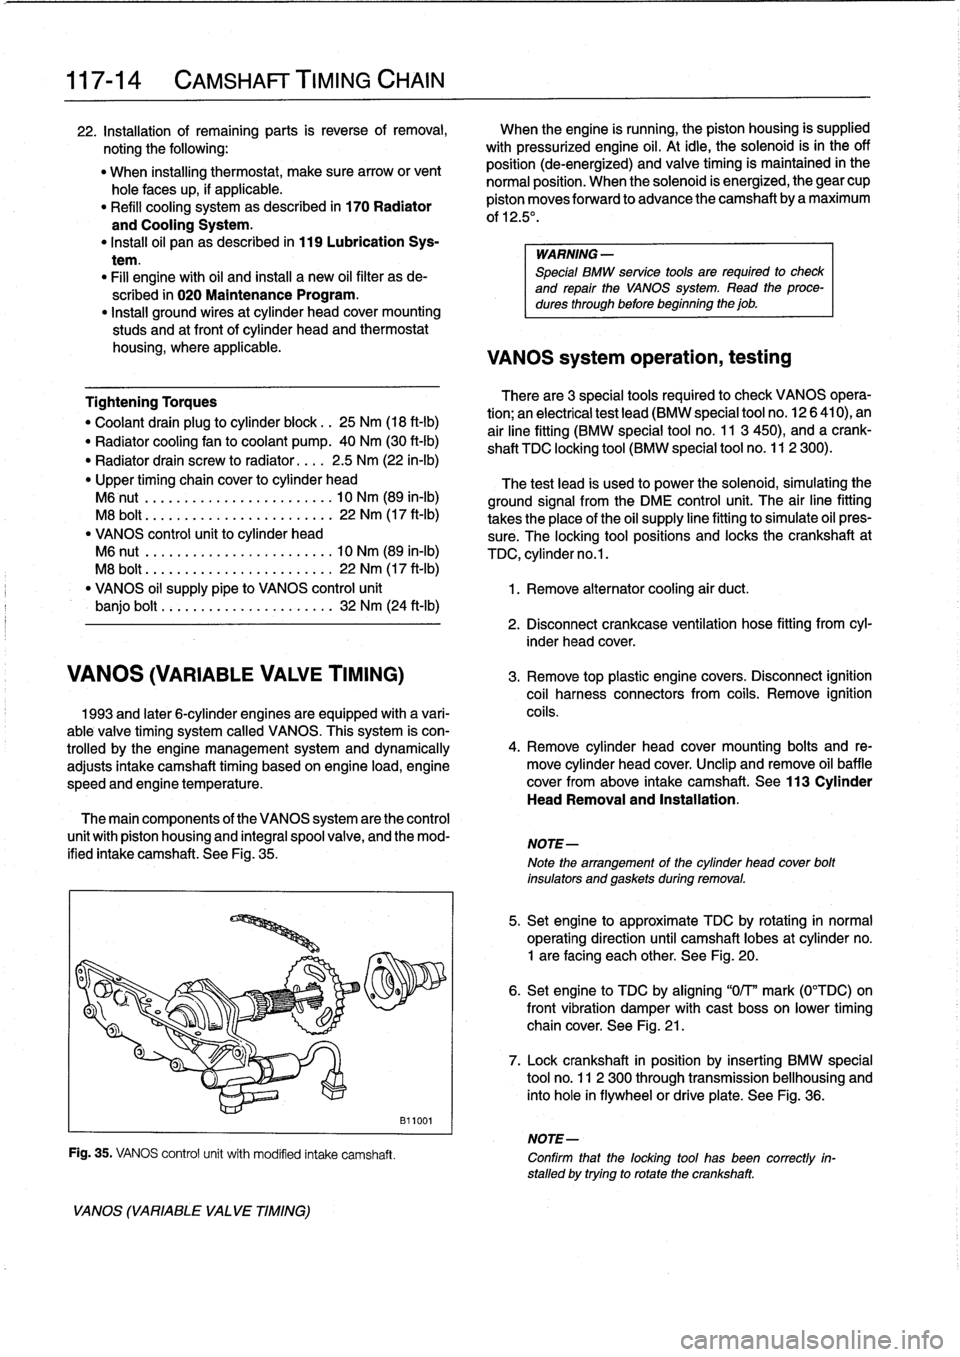 BMW 328i 1994 E36 Workshop Manual 
117-
1
4

	

CAMSHAFT
TIMING
CHAIN

22
.
Installation
of
remaining
parts
is
reverse
of
removal,

	

When
theengine
is
running,
the
piston
housing
is
supplied

noting
the
following
:

	

with
pressuri